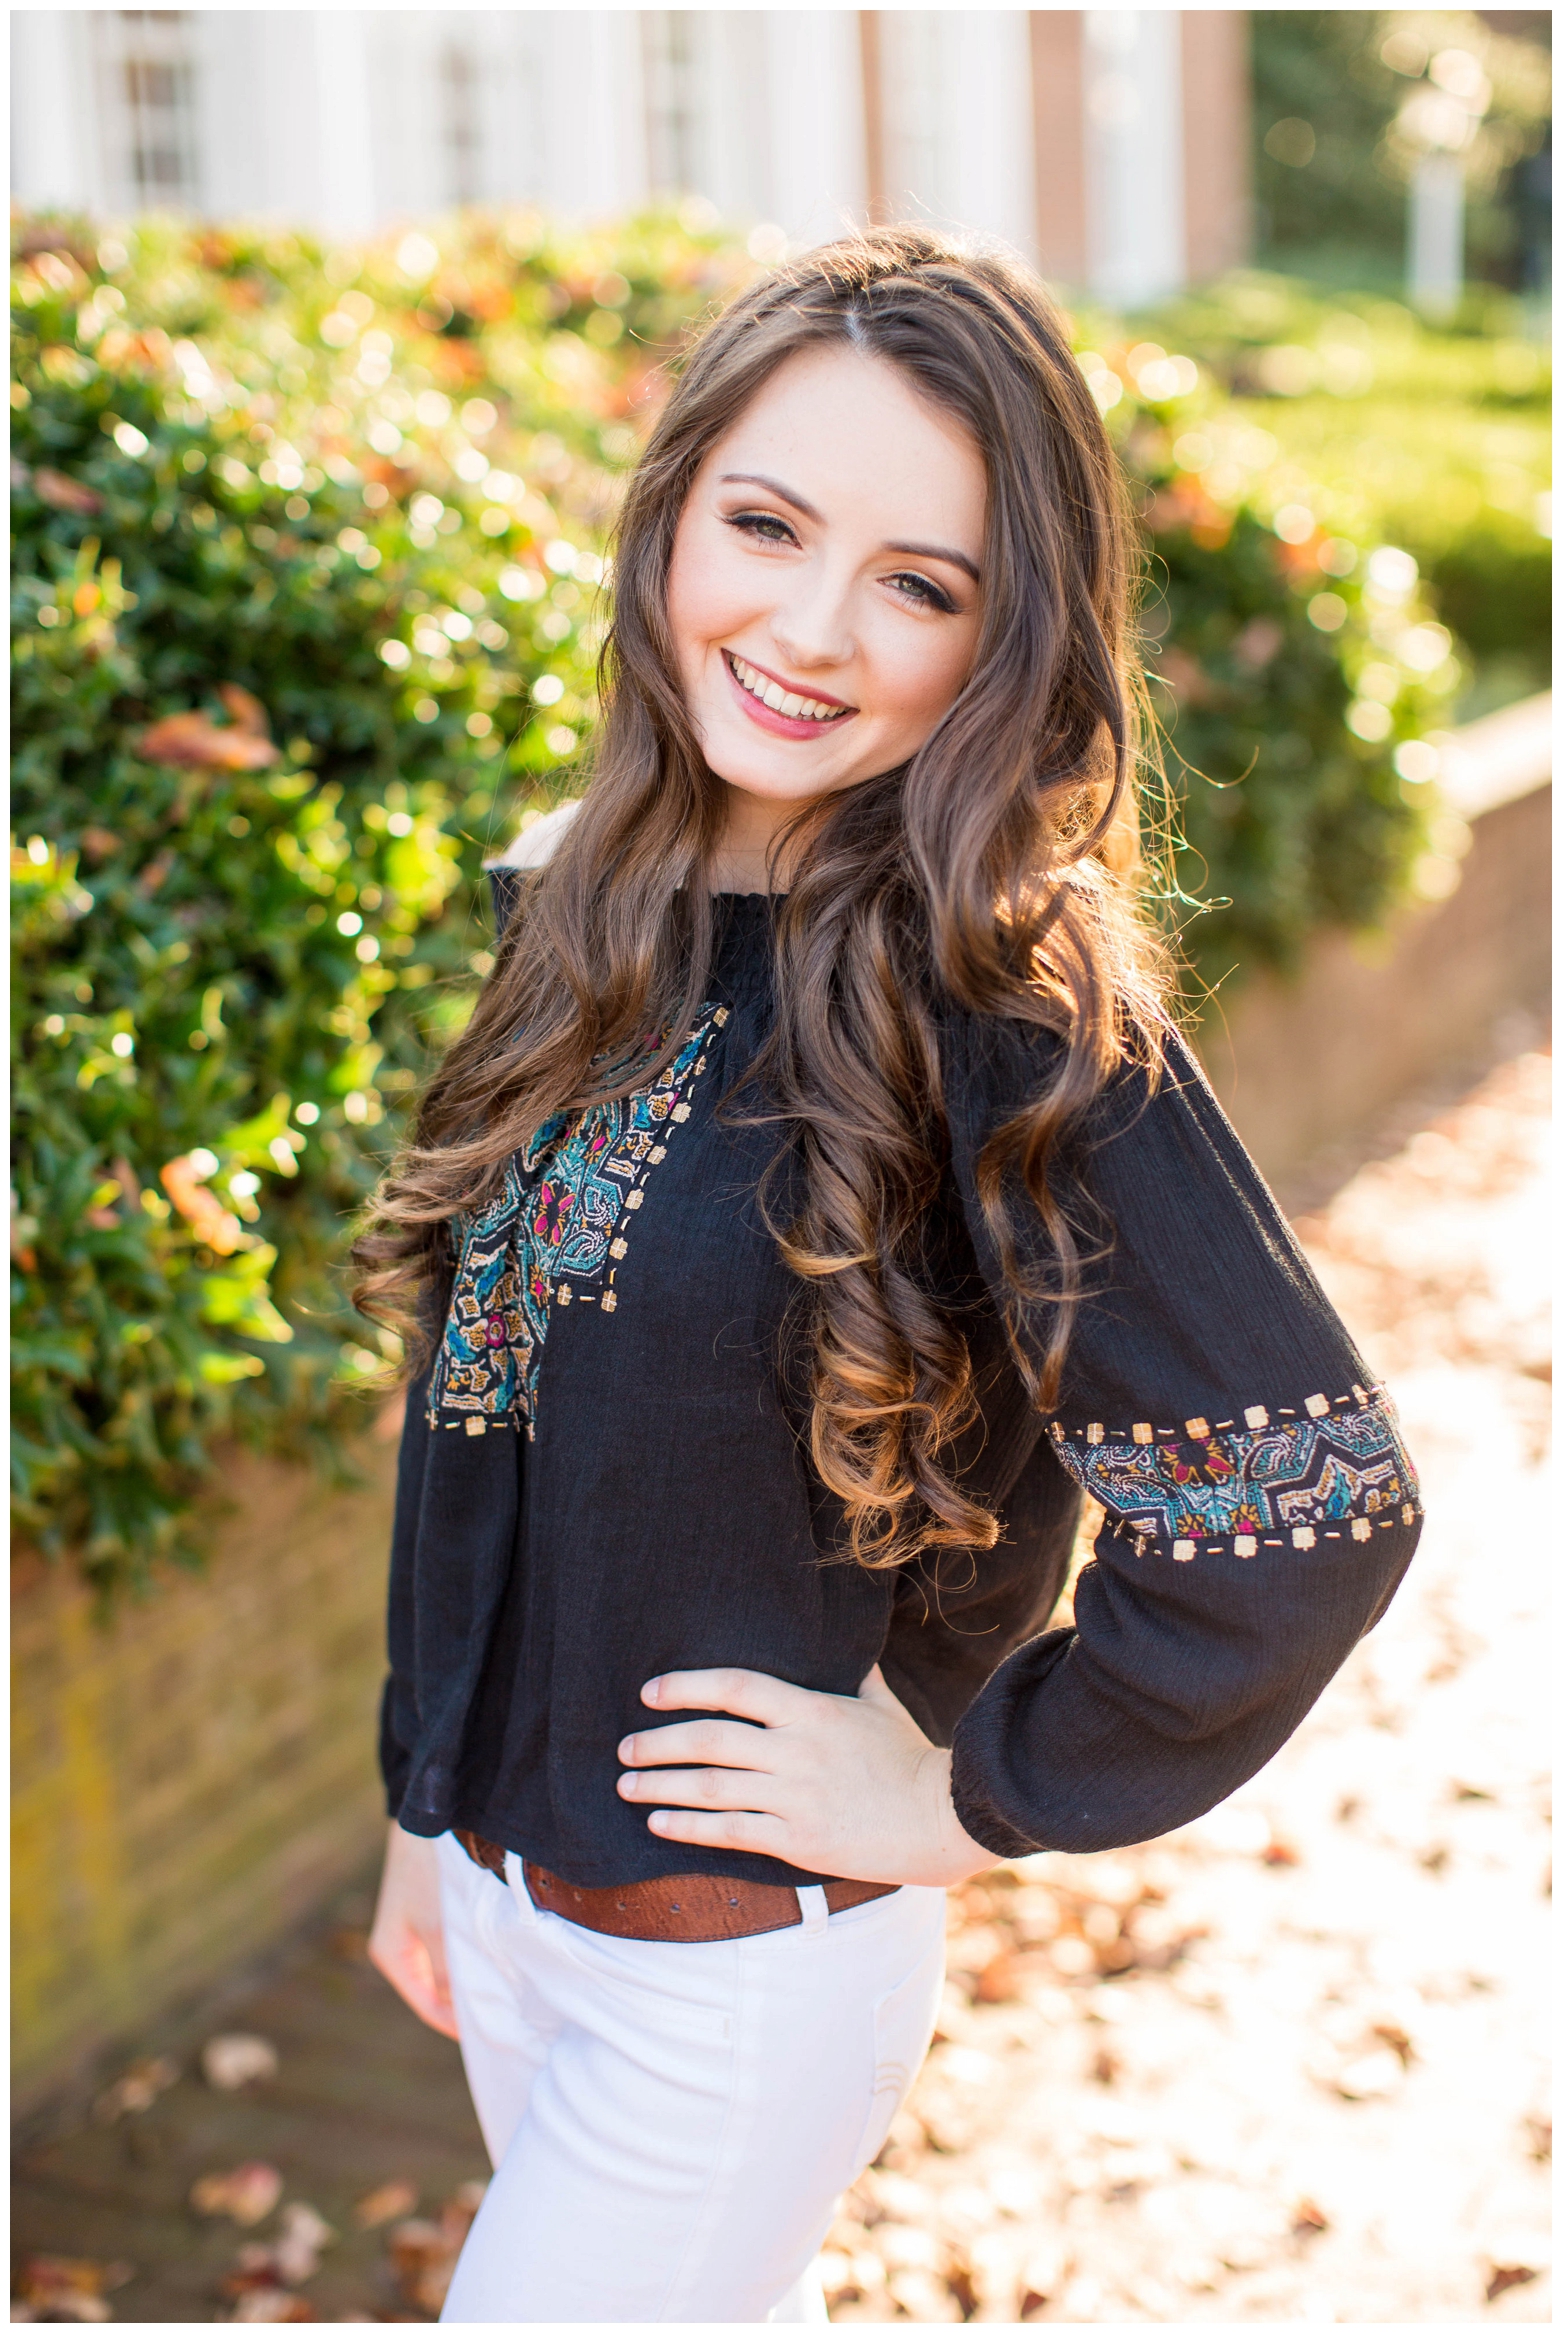 View More: http://hopetaylorphotographyphotos.pass.us/taylor-senior-session-fall